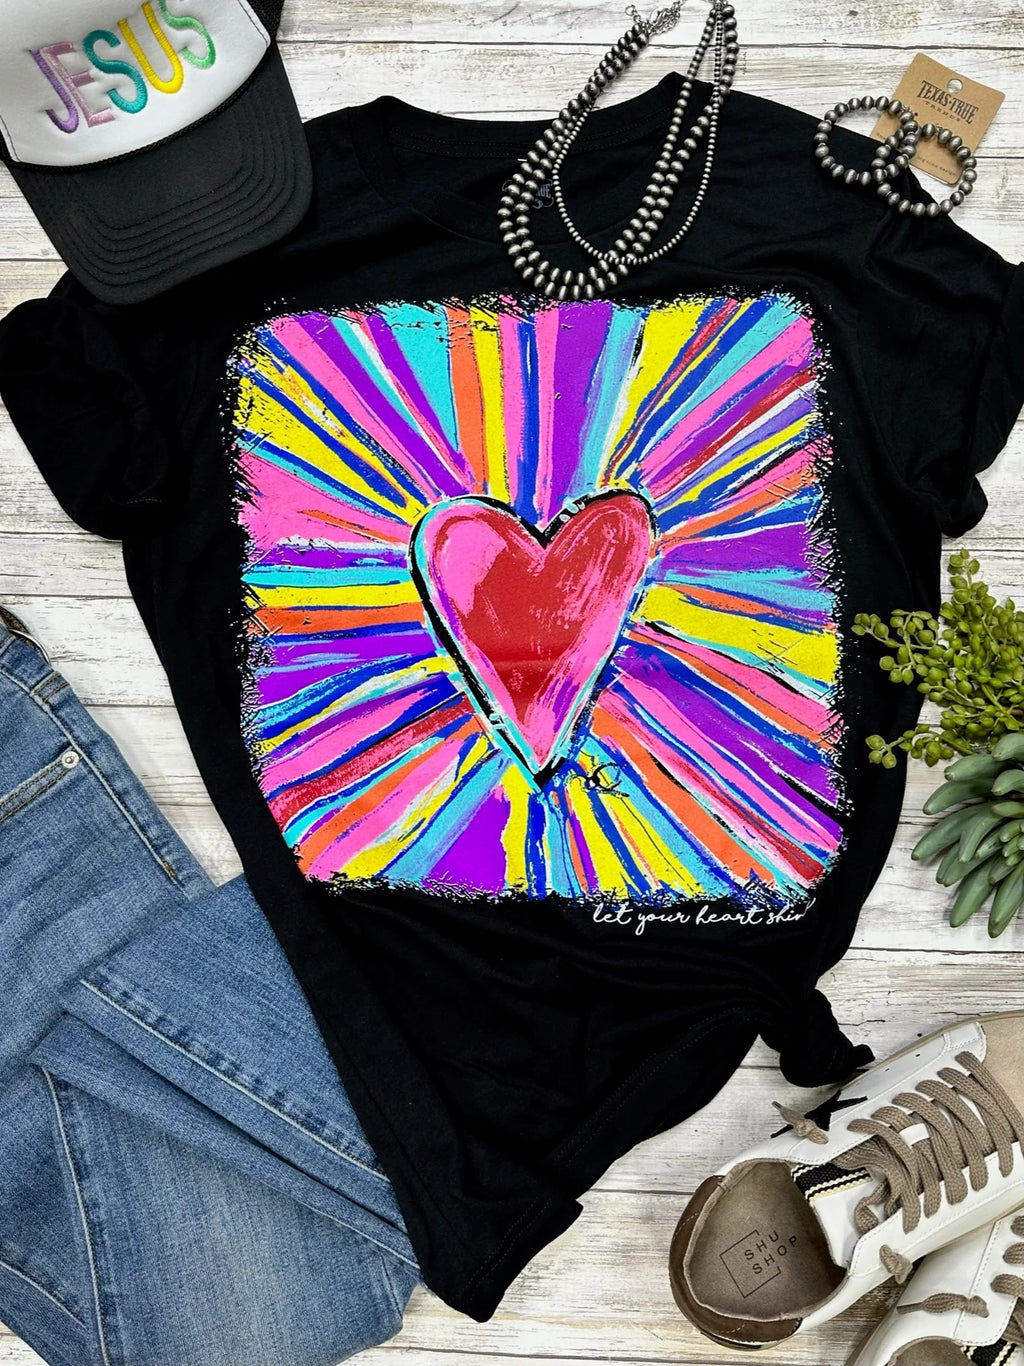 Callie's Let Your Heart Shine Tee